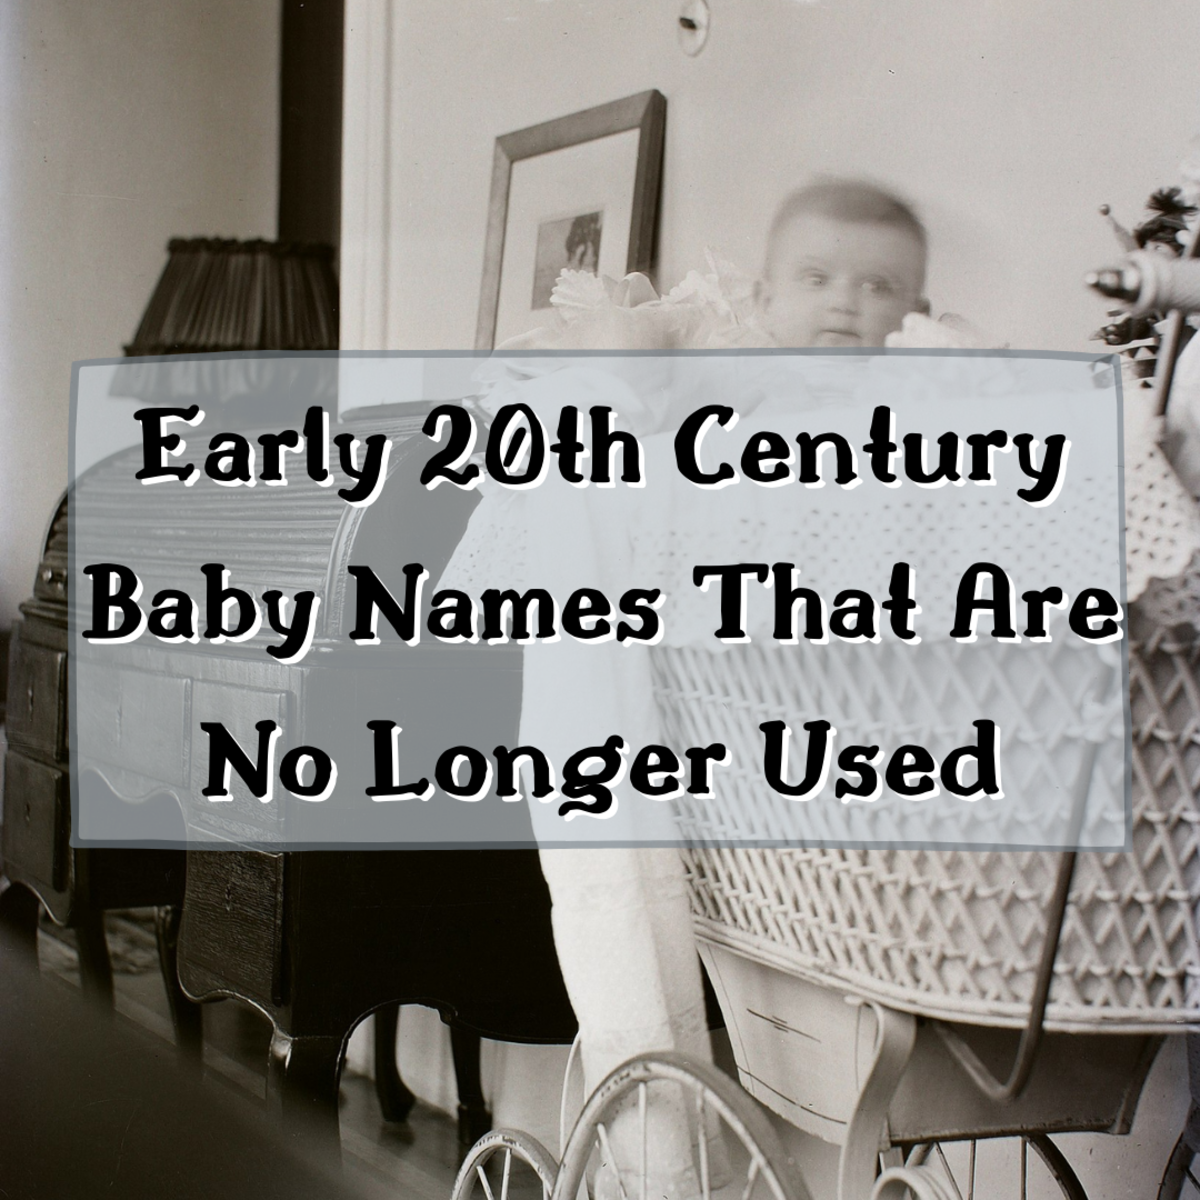 Read on for a list of early 20th century names that are not often used anymore.